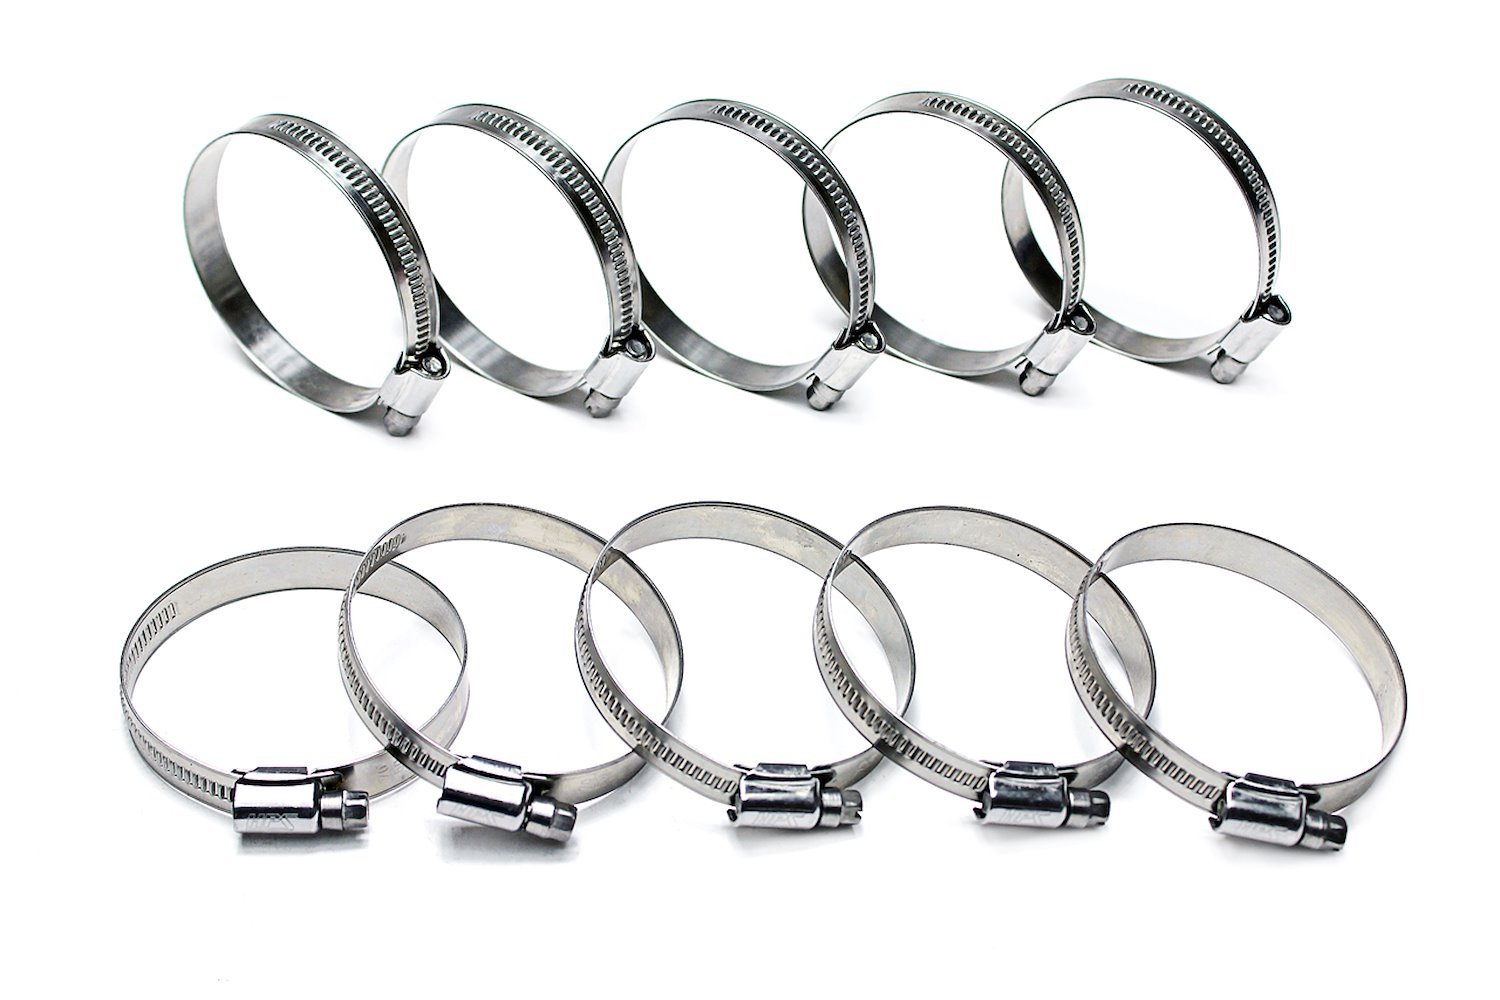 EMSC-35-50x10 Embossed Hose Clamp, Stainless Steel Embossed Hose Clamp, Size #24, Effective Range: 1-1/2 in.- 2 in., 10Pc